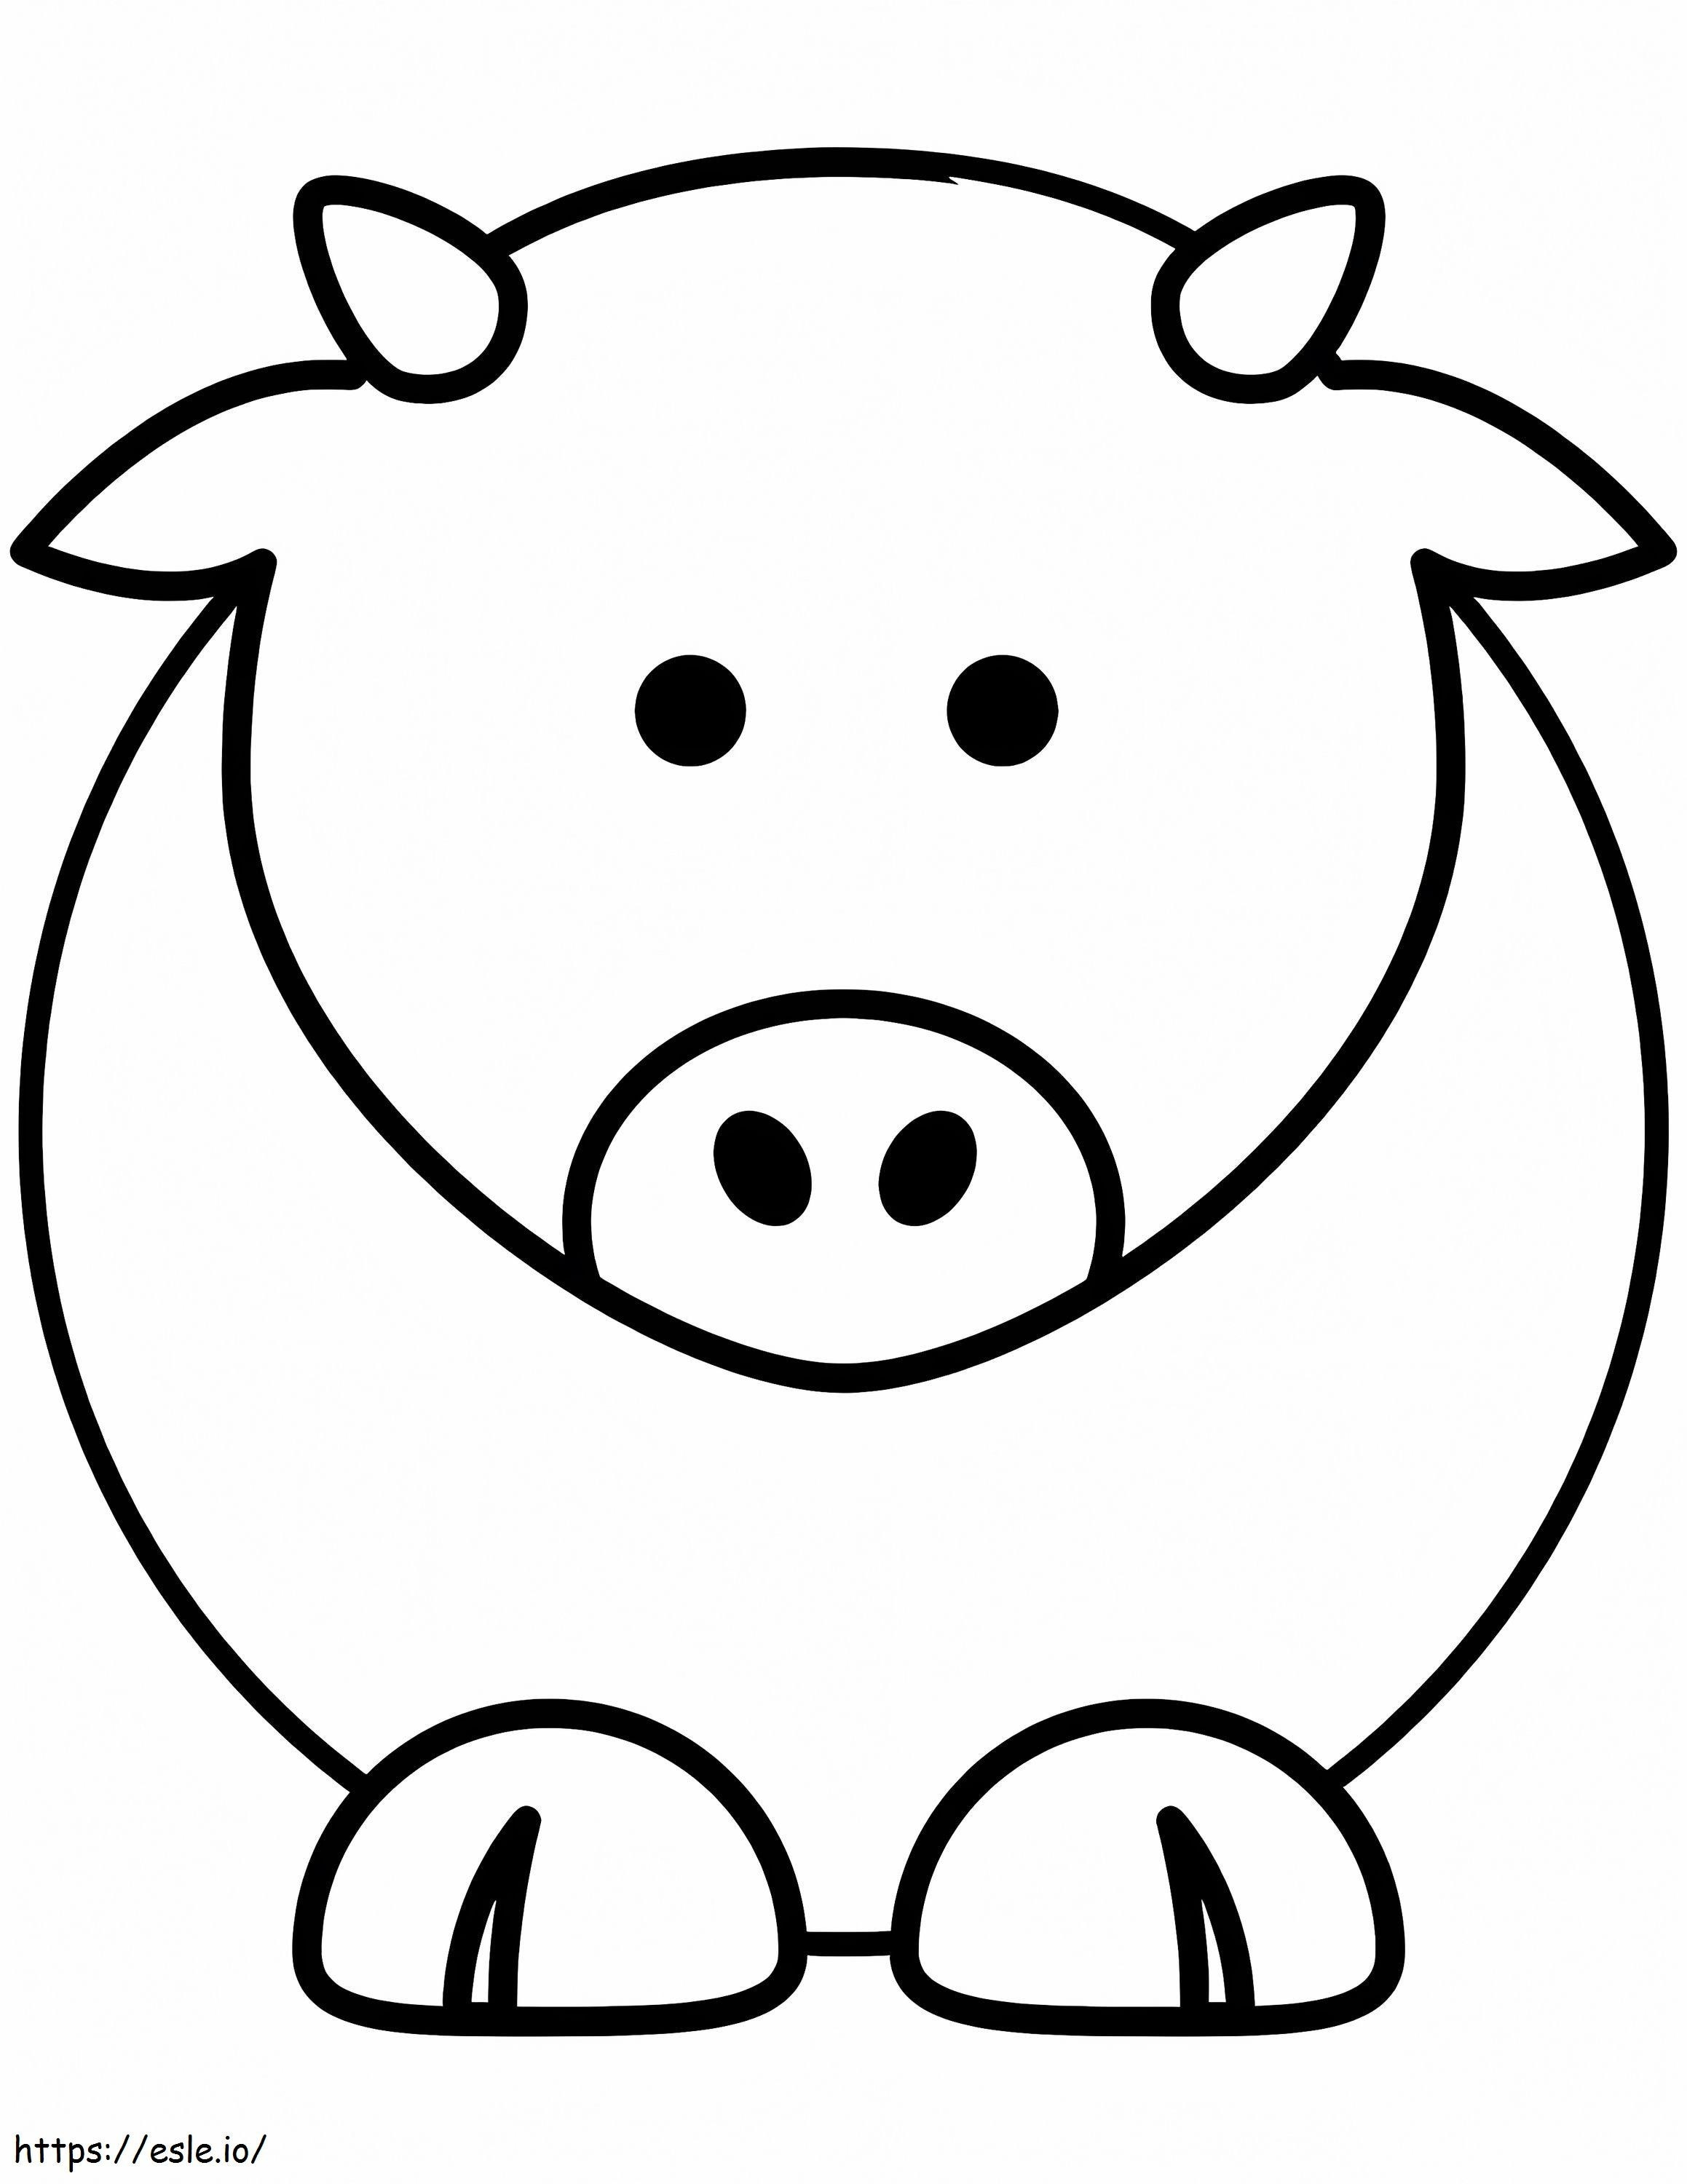 Cute Simple Cow coloring page